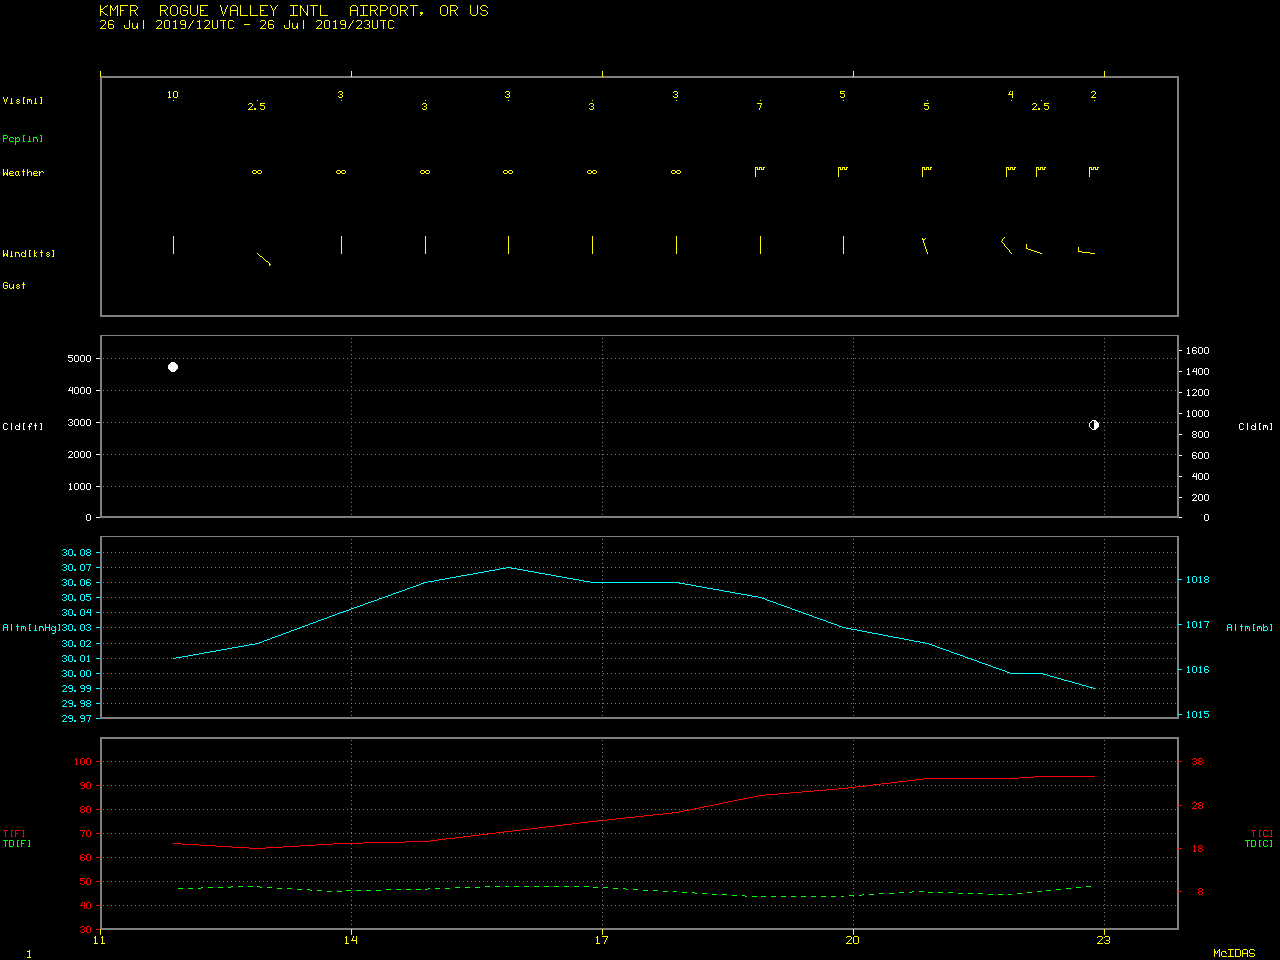 Time series of surface data from Rogue Valley International Airport in Medford [click to enlarge]